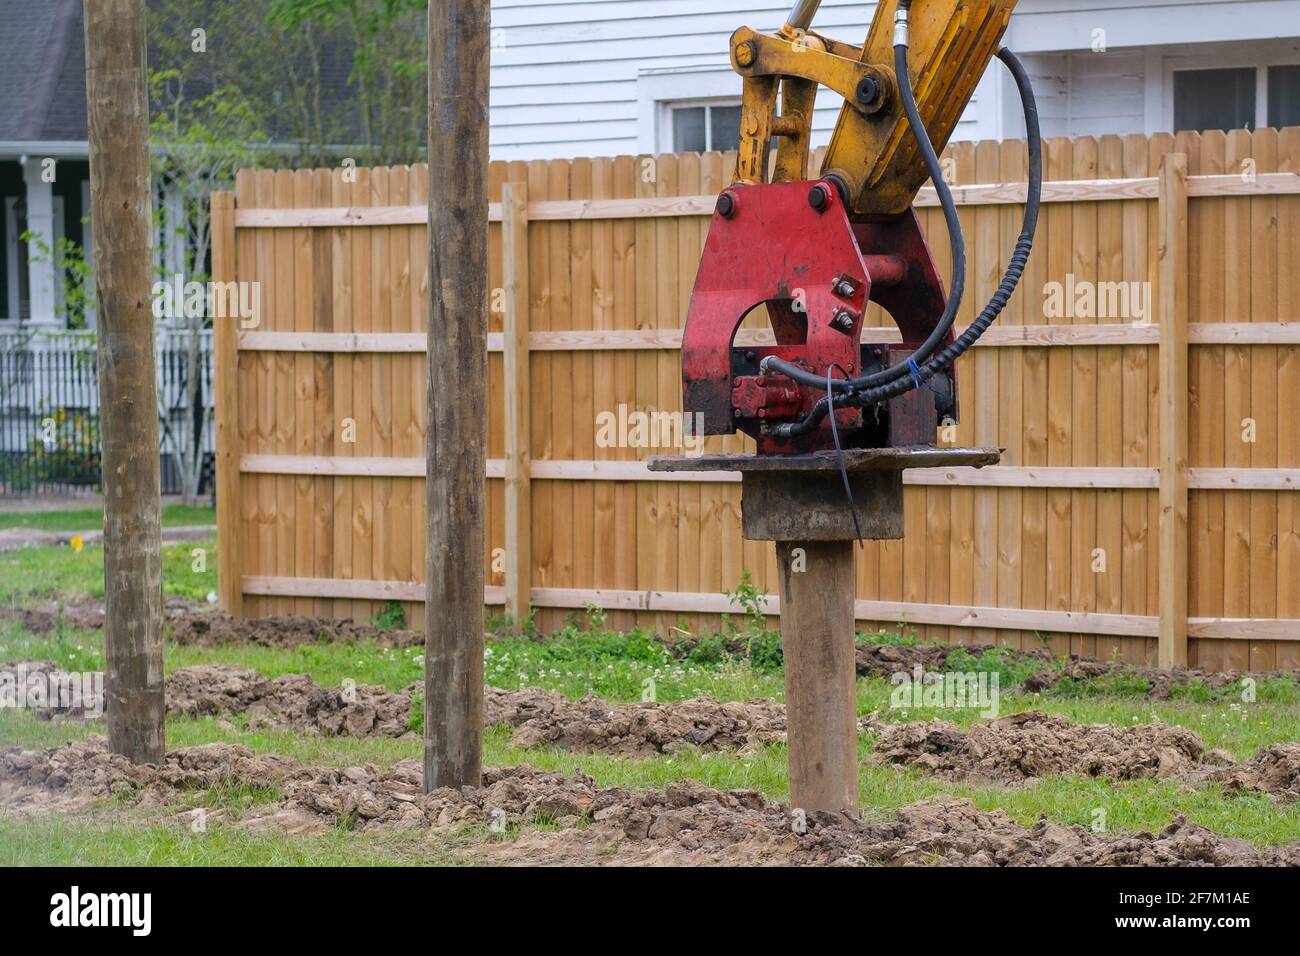 Vibratory pile driver attachment in action at new residential construction site Stock Photo